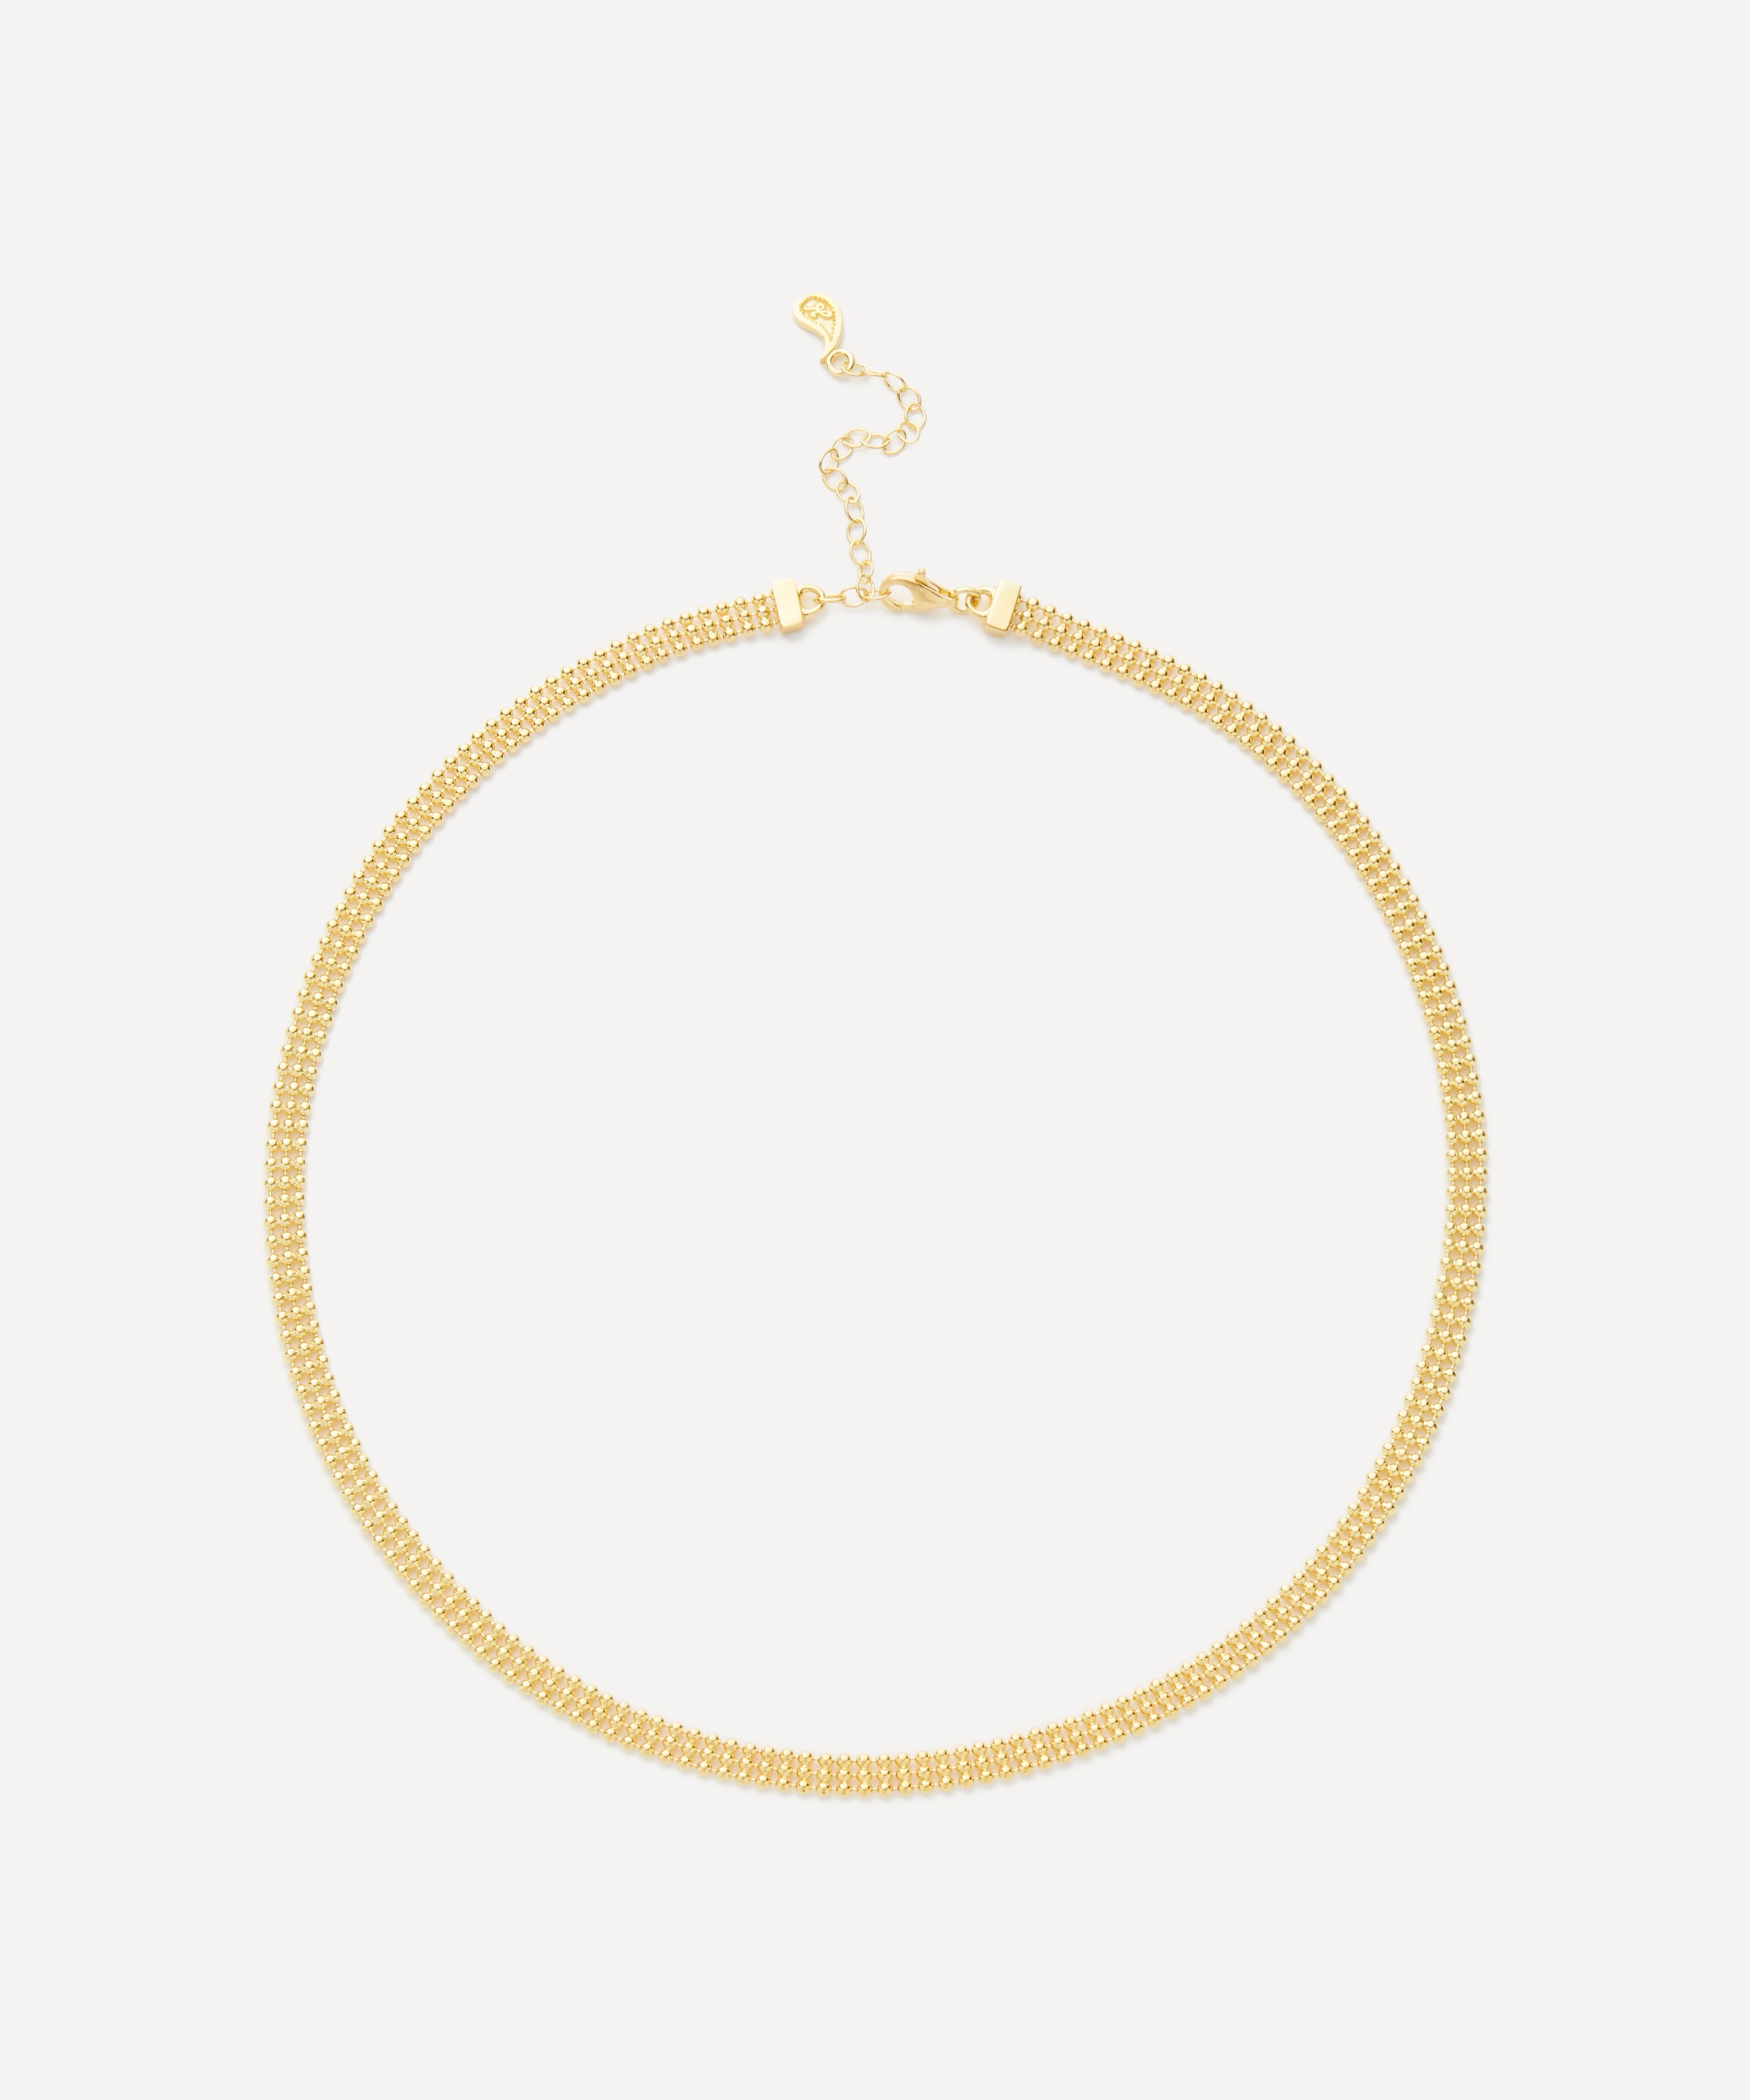 Maggoosh - Gold-Plated Altar Chain Necklace